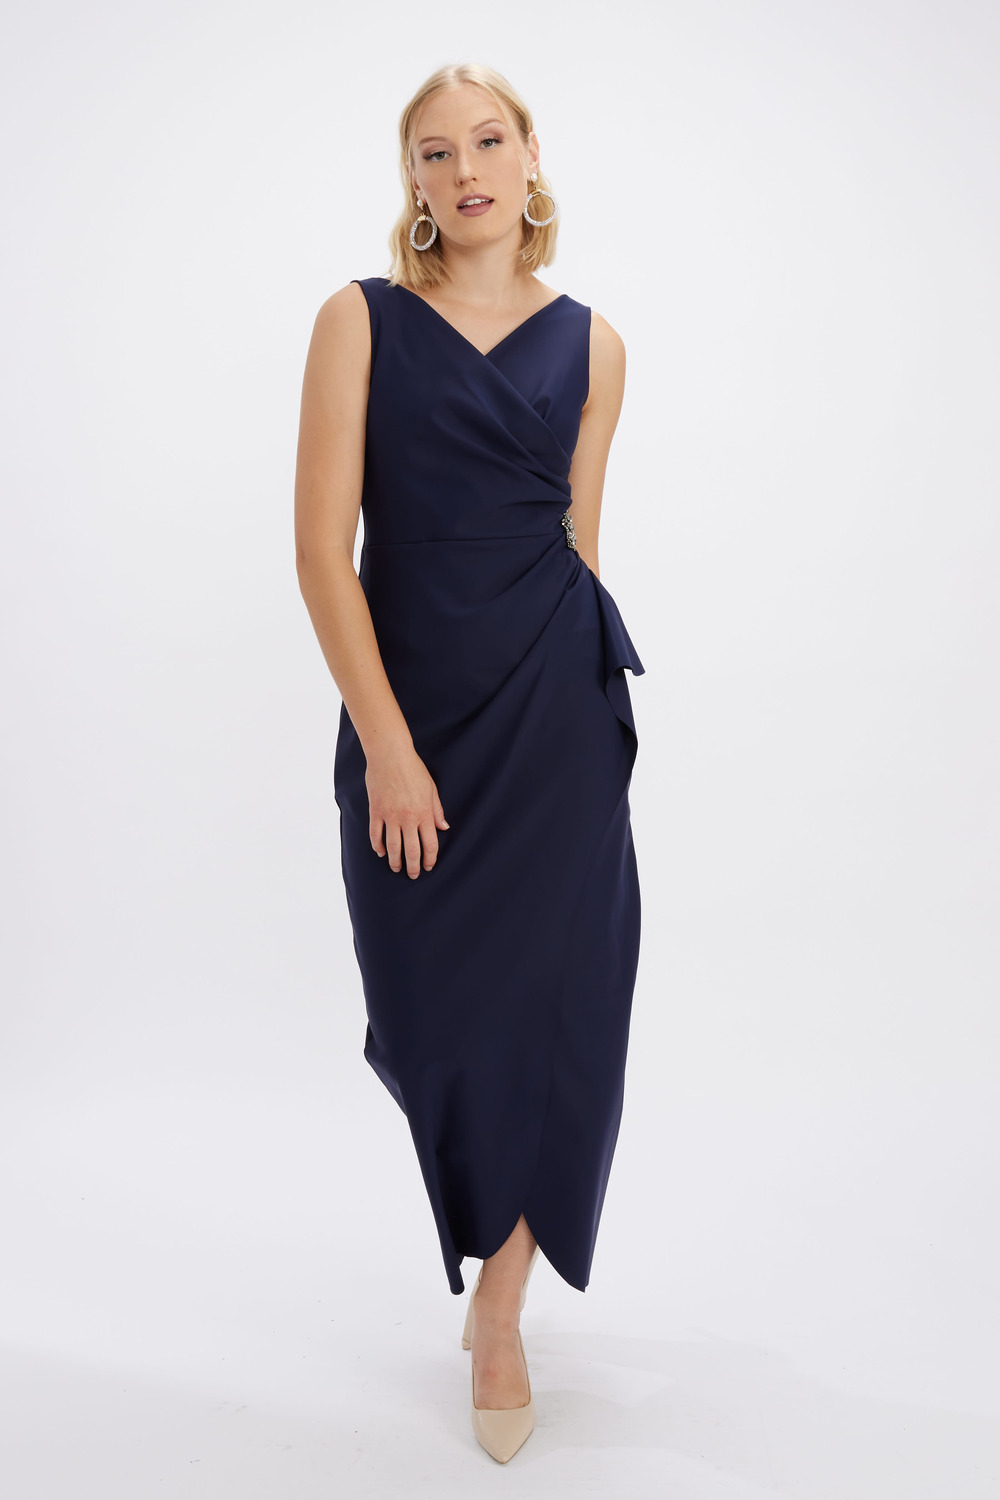 Wrap Front Beaded Gown Style 134200. Navy